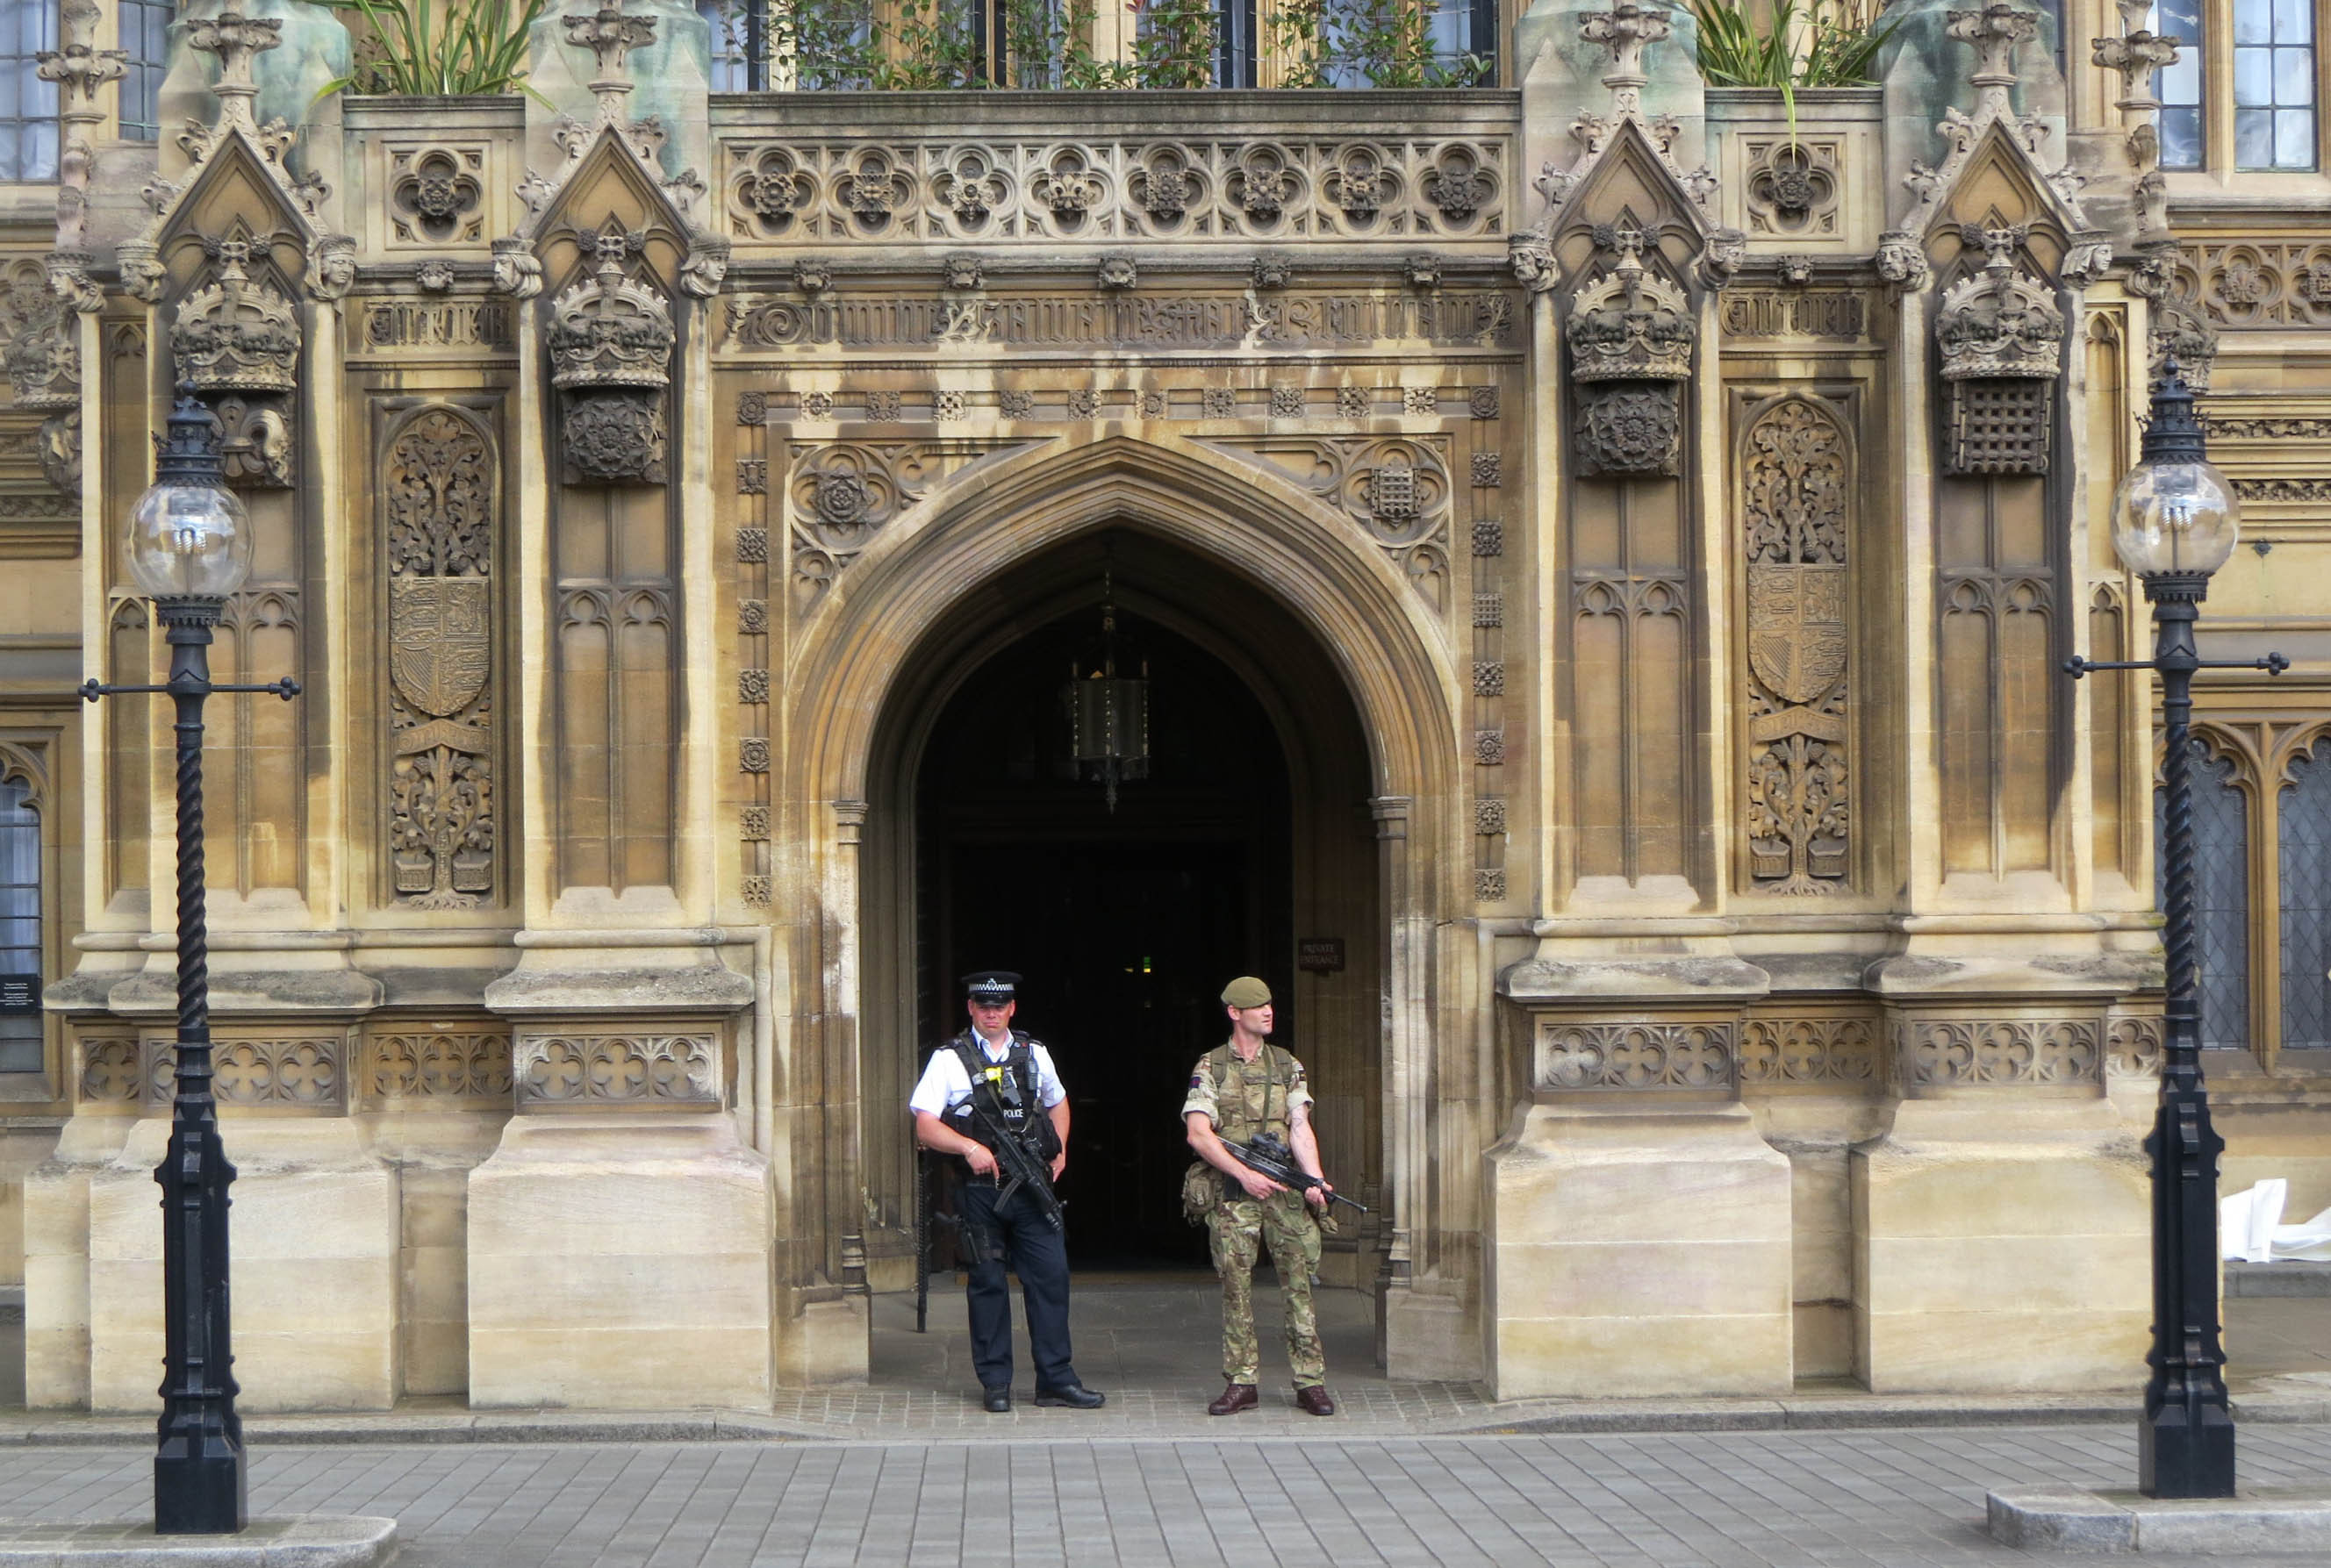 Police and military standing guard in Parliament after the Westminster attack